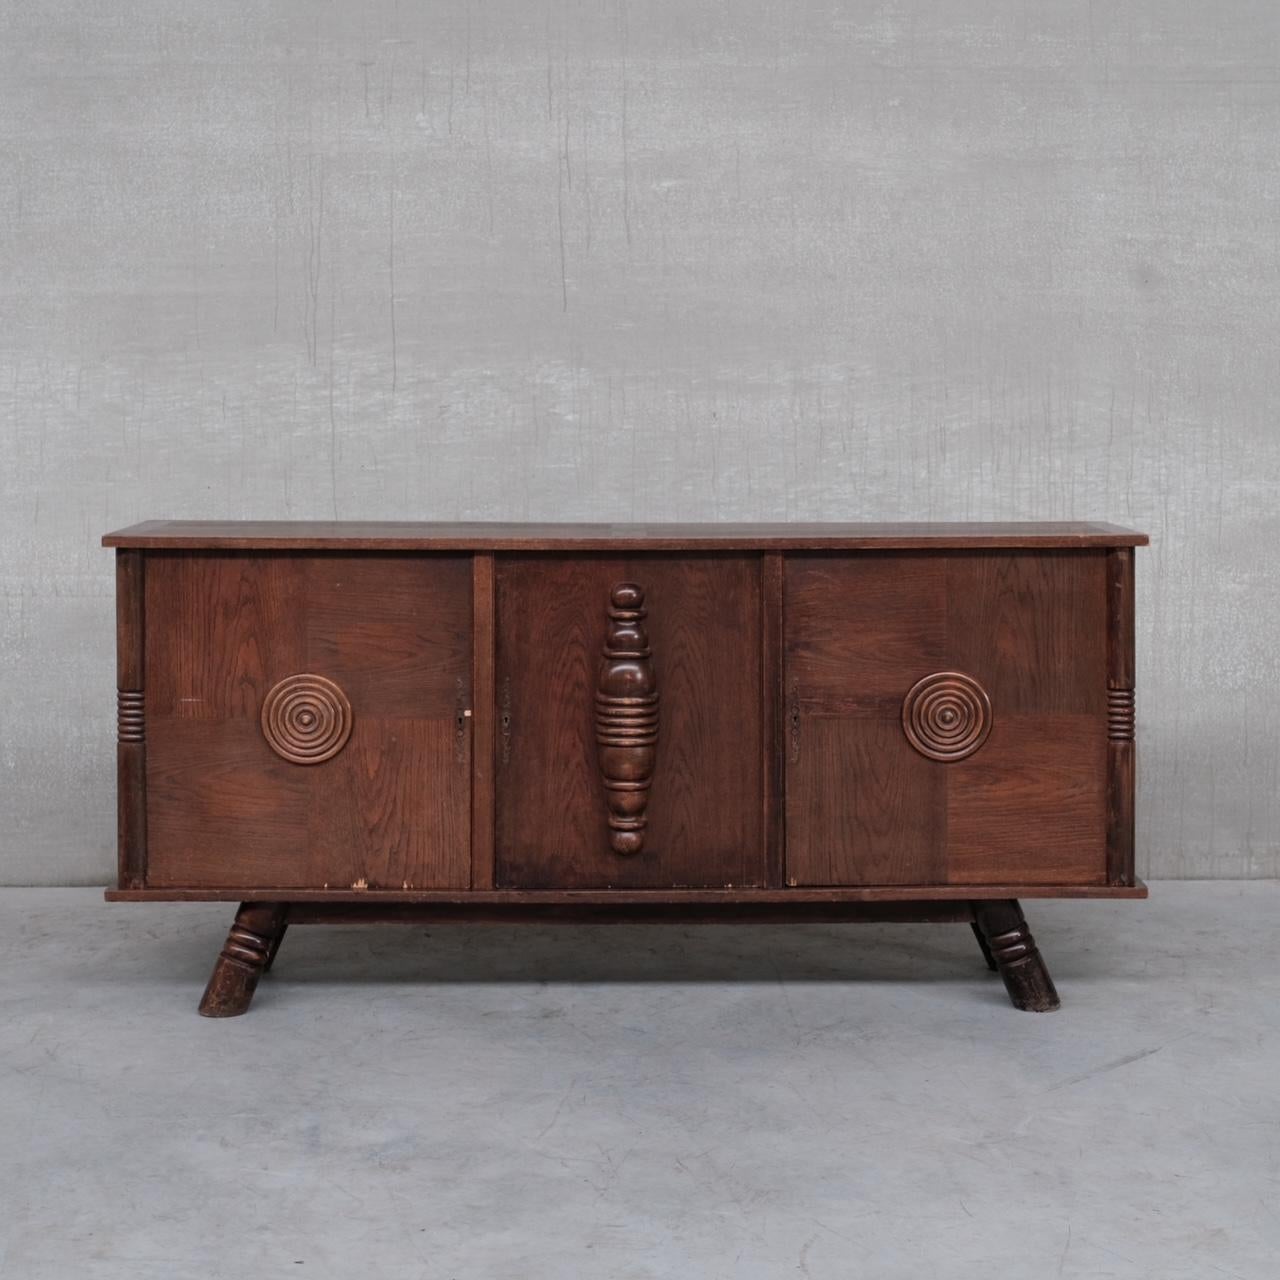 A large sideboard in the manner of Charles Dudouyt. 

France, c1940s. 

Solid oak and oak veneer. 

The cabinet has suffered some wear over the years, but is being restorered by our in house restorer, so please request photos of the updated